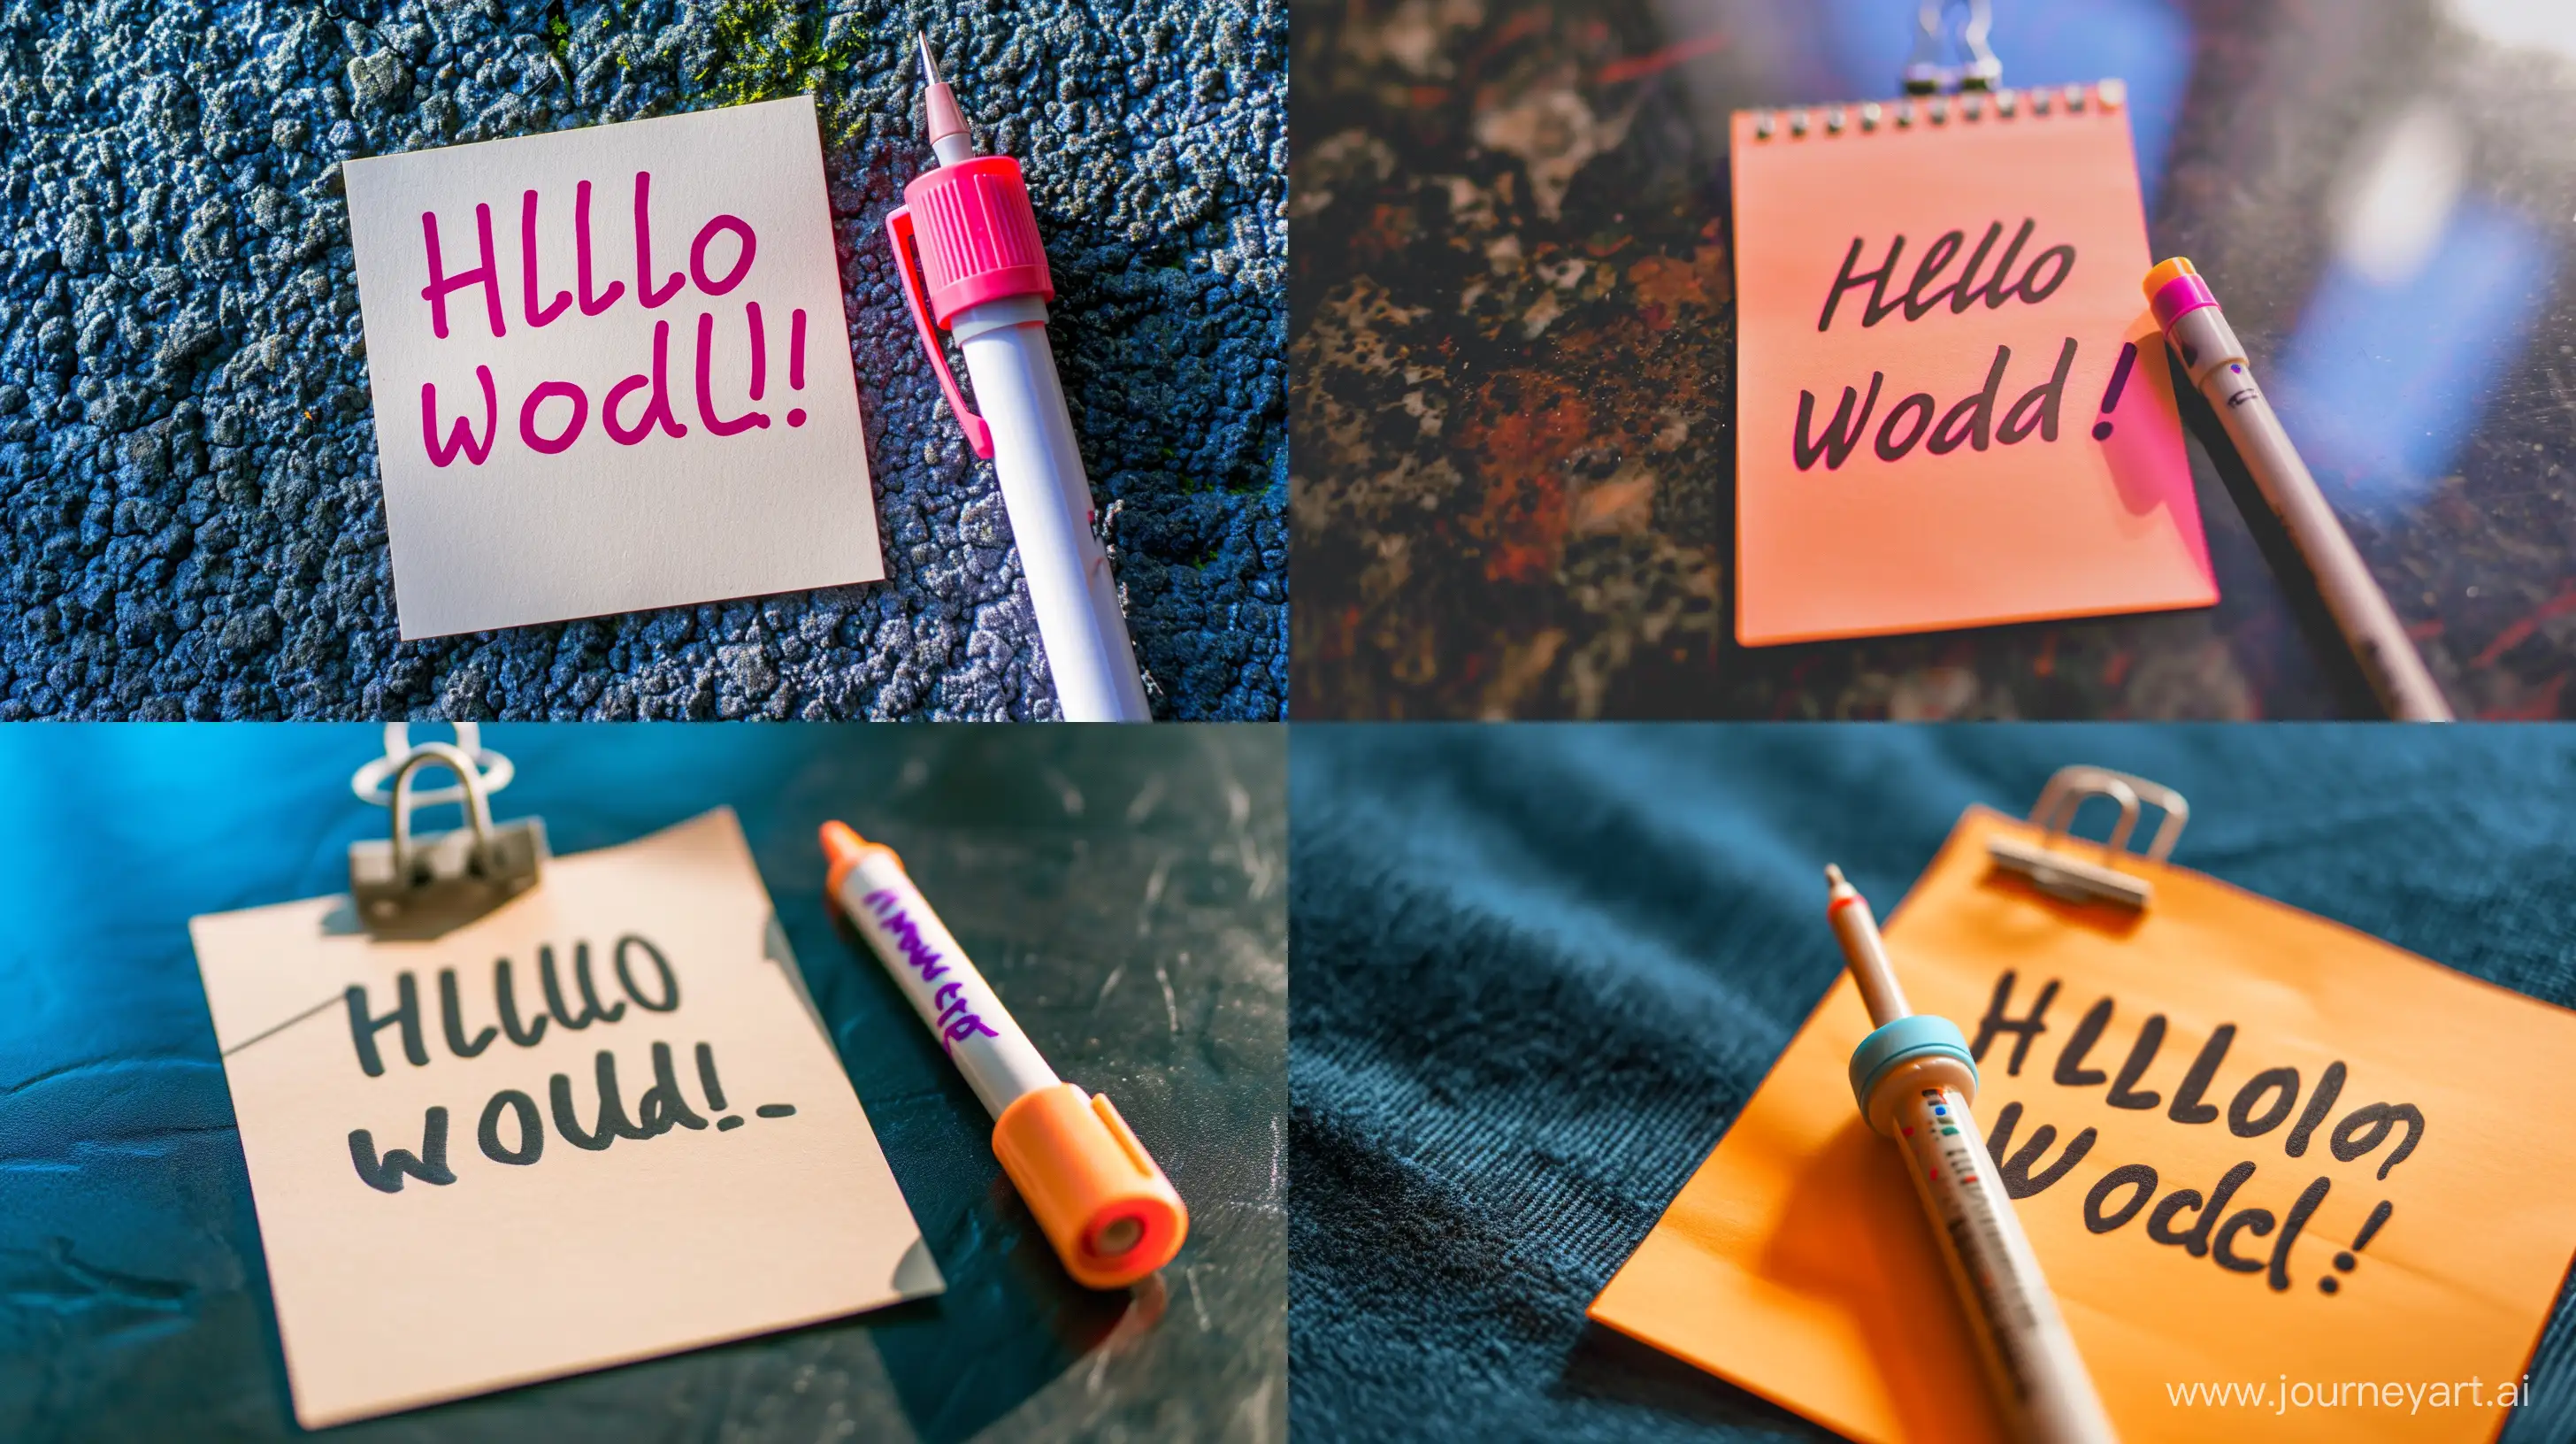 Greetings-in-a-Note-Hello-World-Marker-Text-on-Sticky-Note